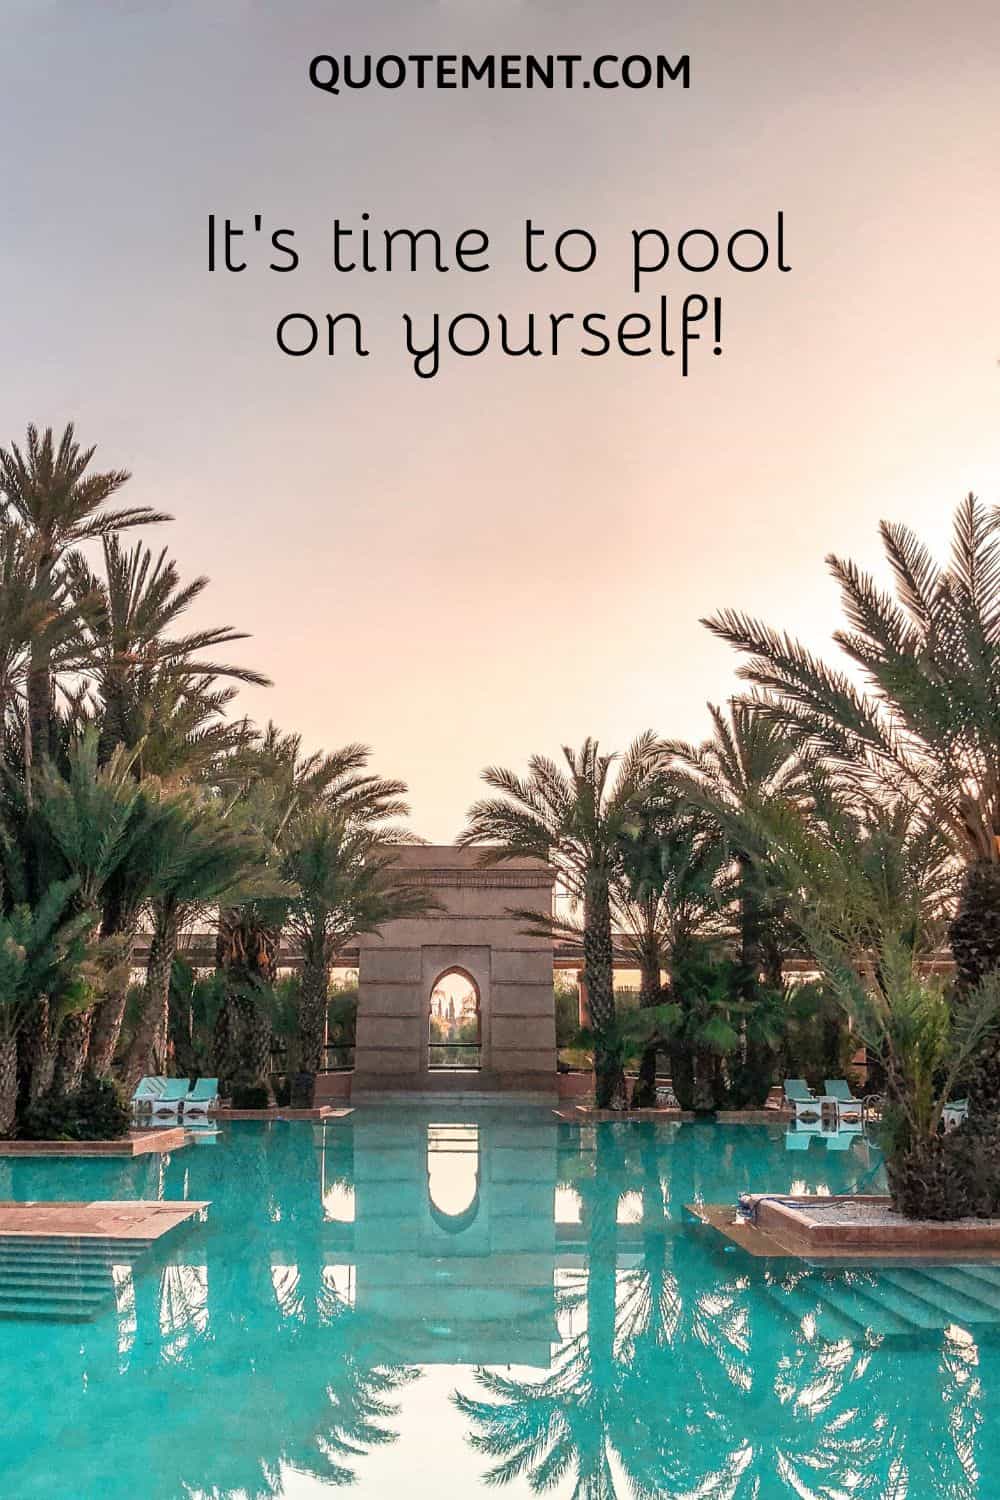 It’s time to pool on yourself!